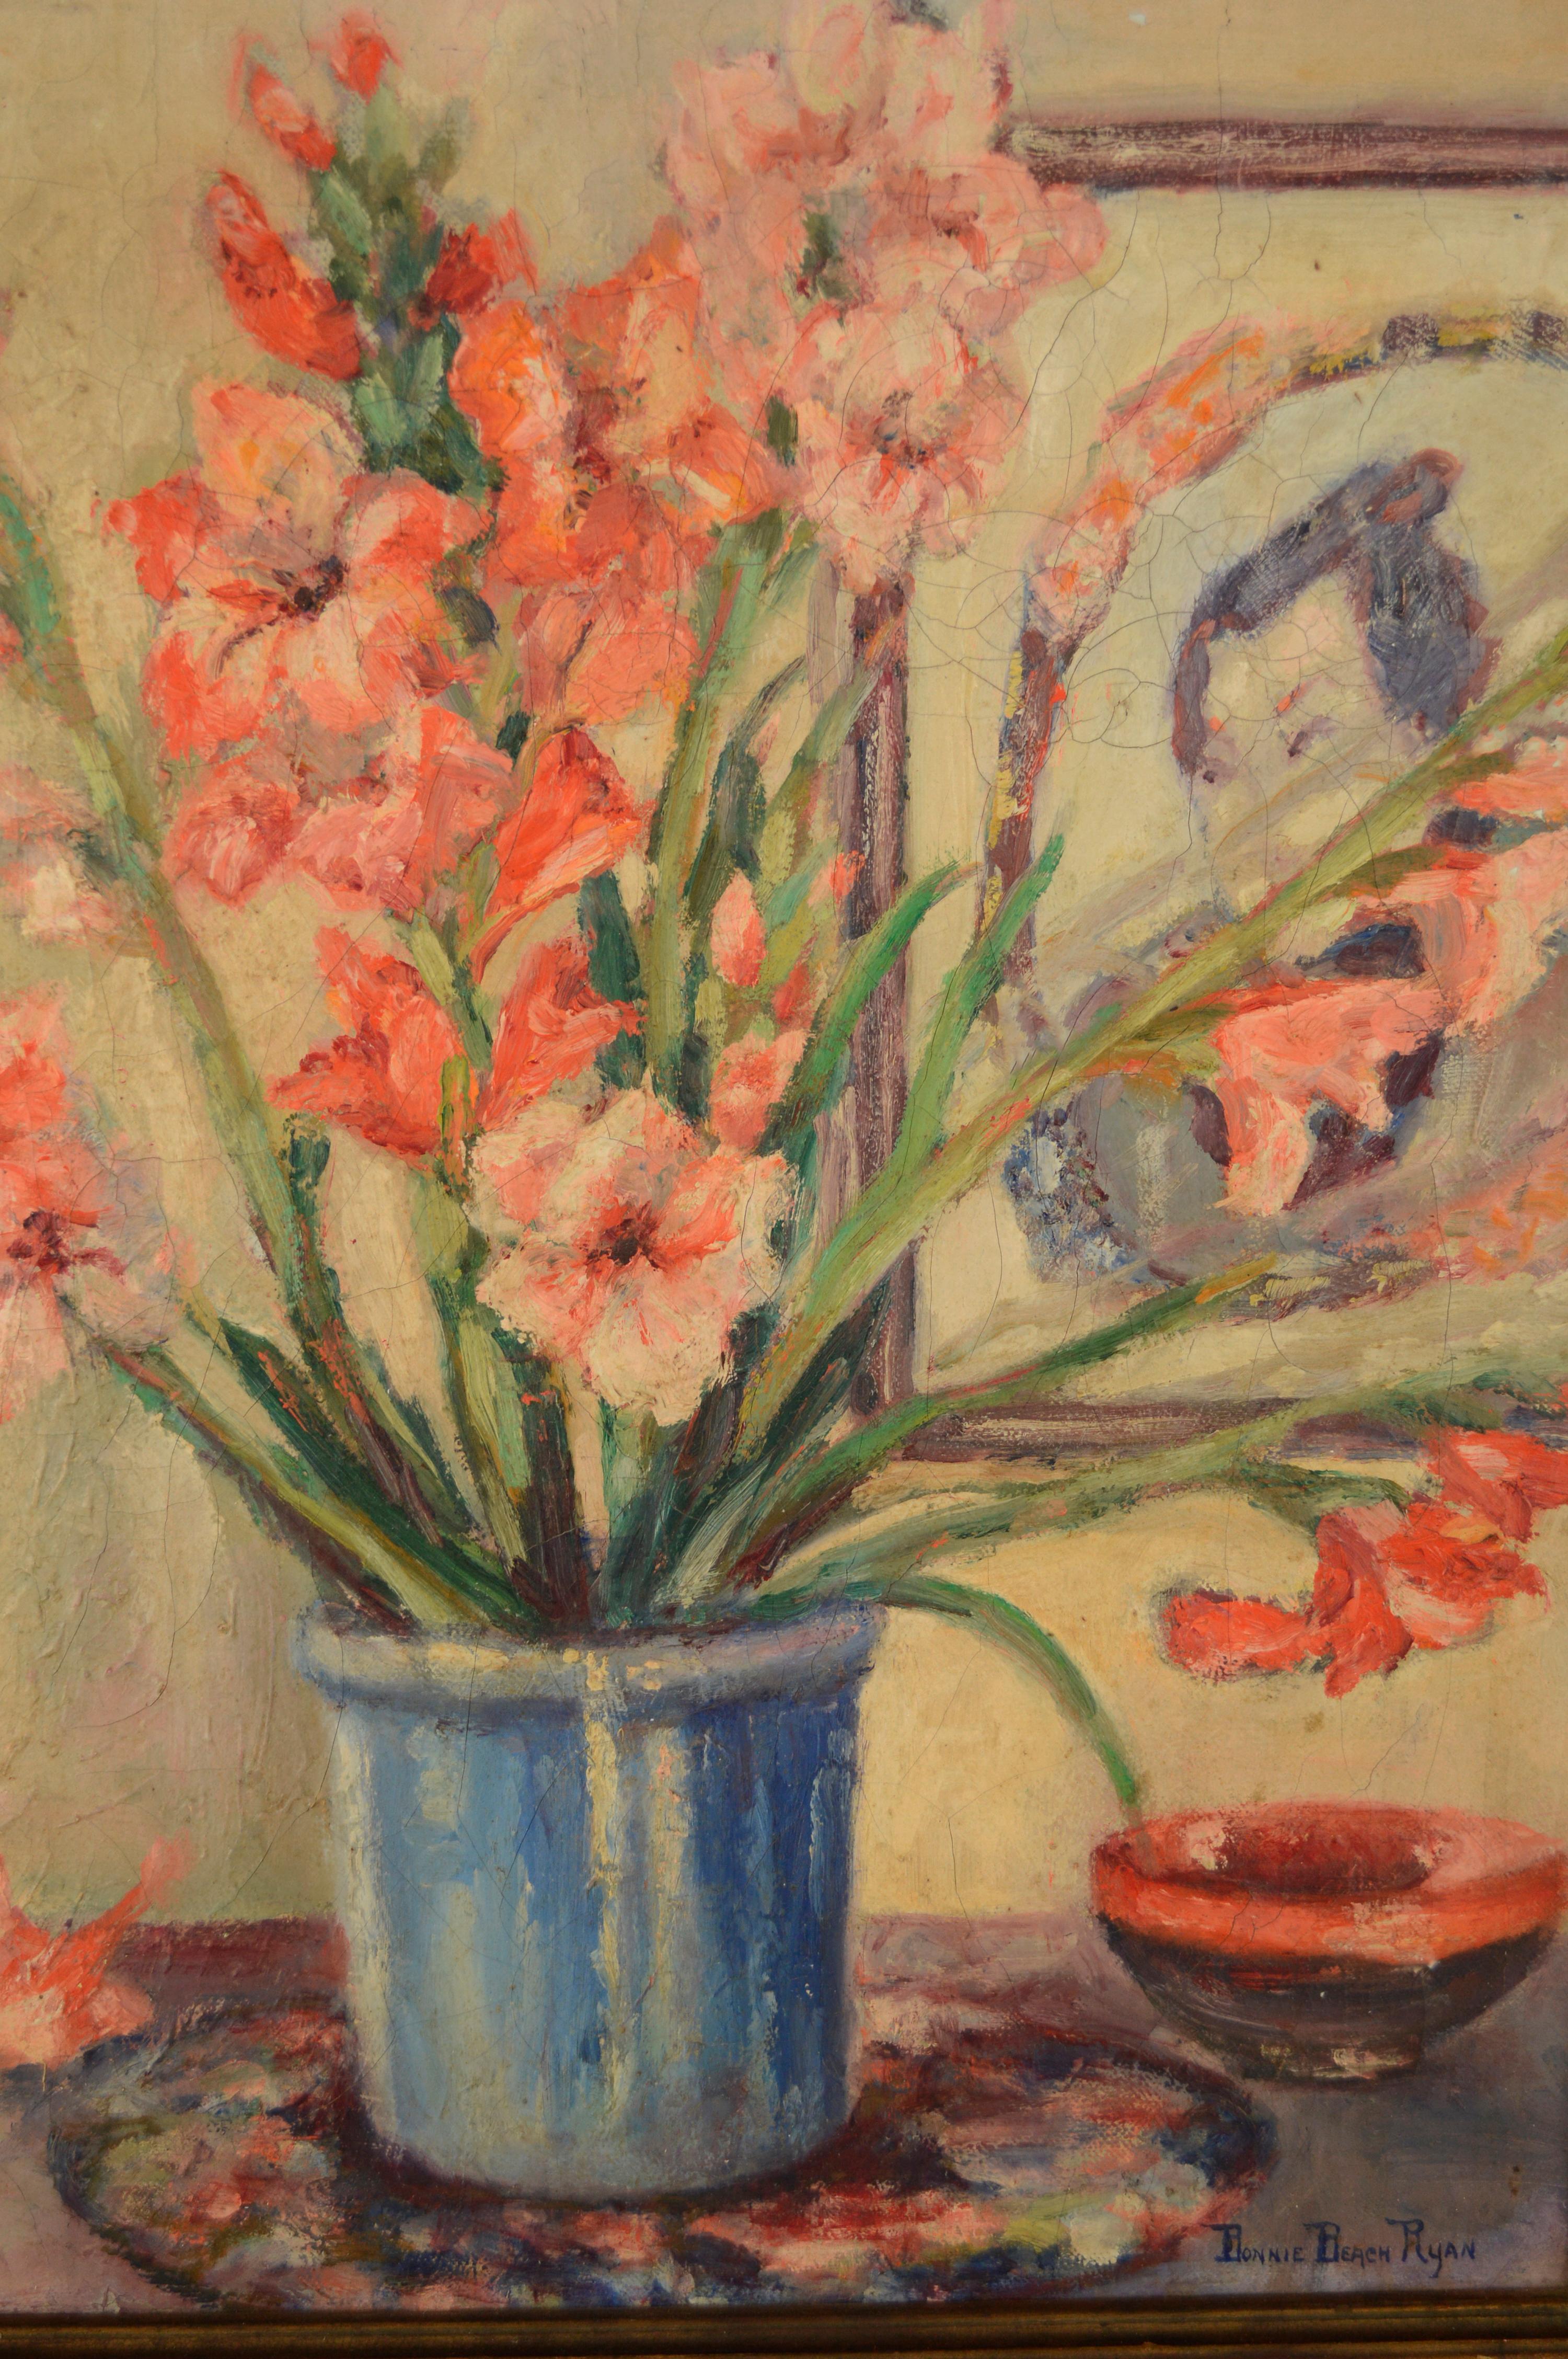 Still Life of Gladiolas in a Blue Pot with bird figurine and Samurai portrait by Bonnie Beach Ryan (American, 1901-1940). In 1933, Bonnie Beach Ryan held her first solo show of flower and still life paintings at the Dana Bartlett Gallery in Los